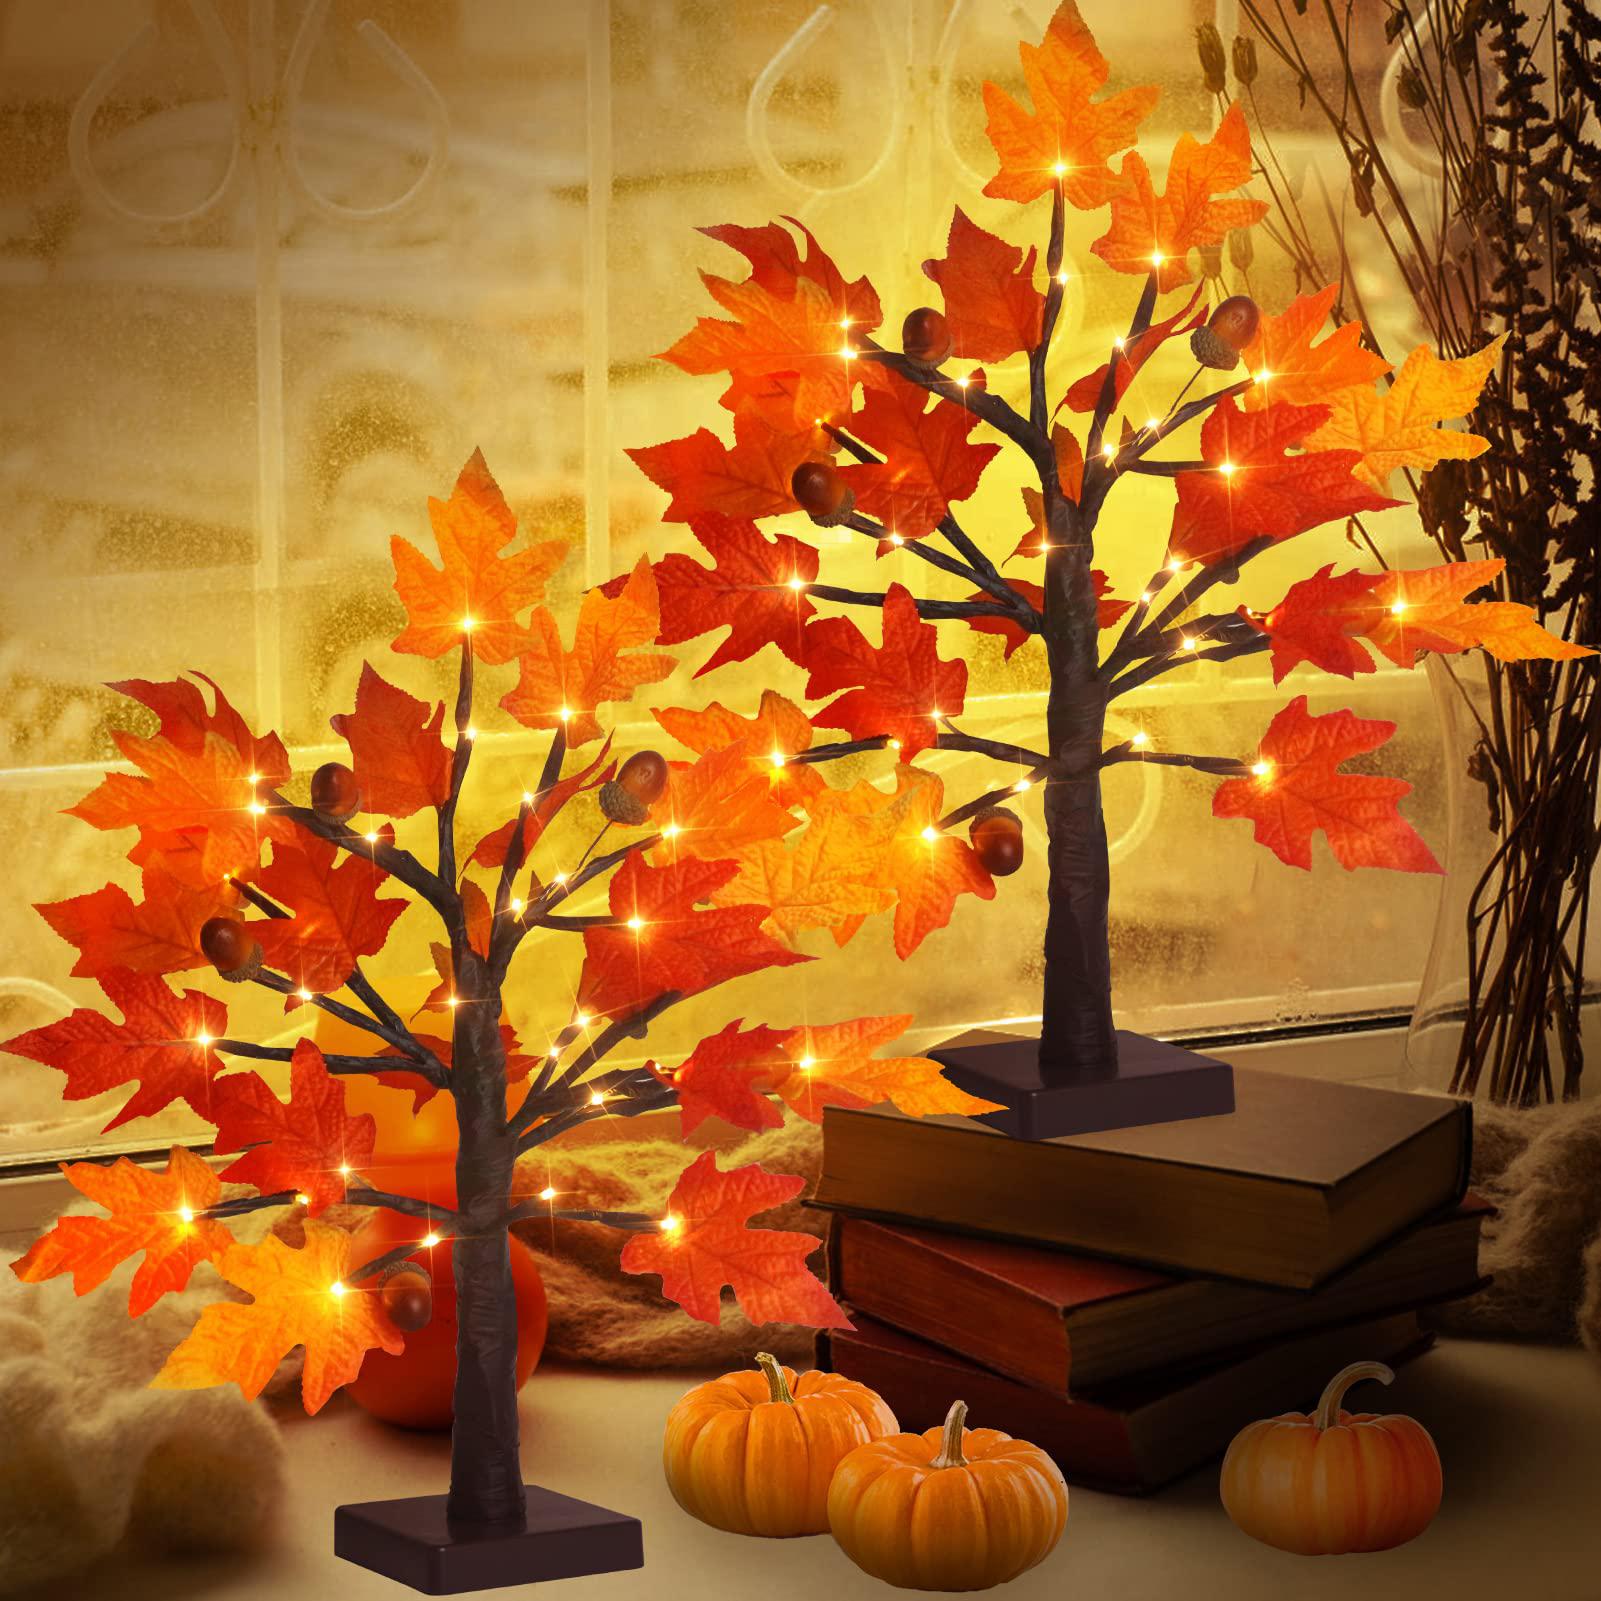 fastdeng 1.5ft lighted maple tree-artificial fall tree light, timer 36 led warm white autumn tabletop tree lights battery ope